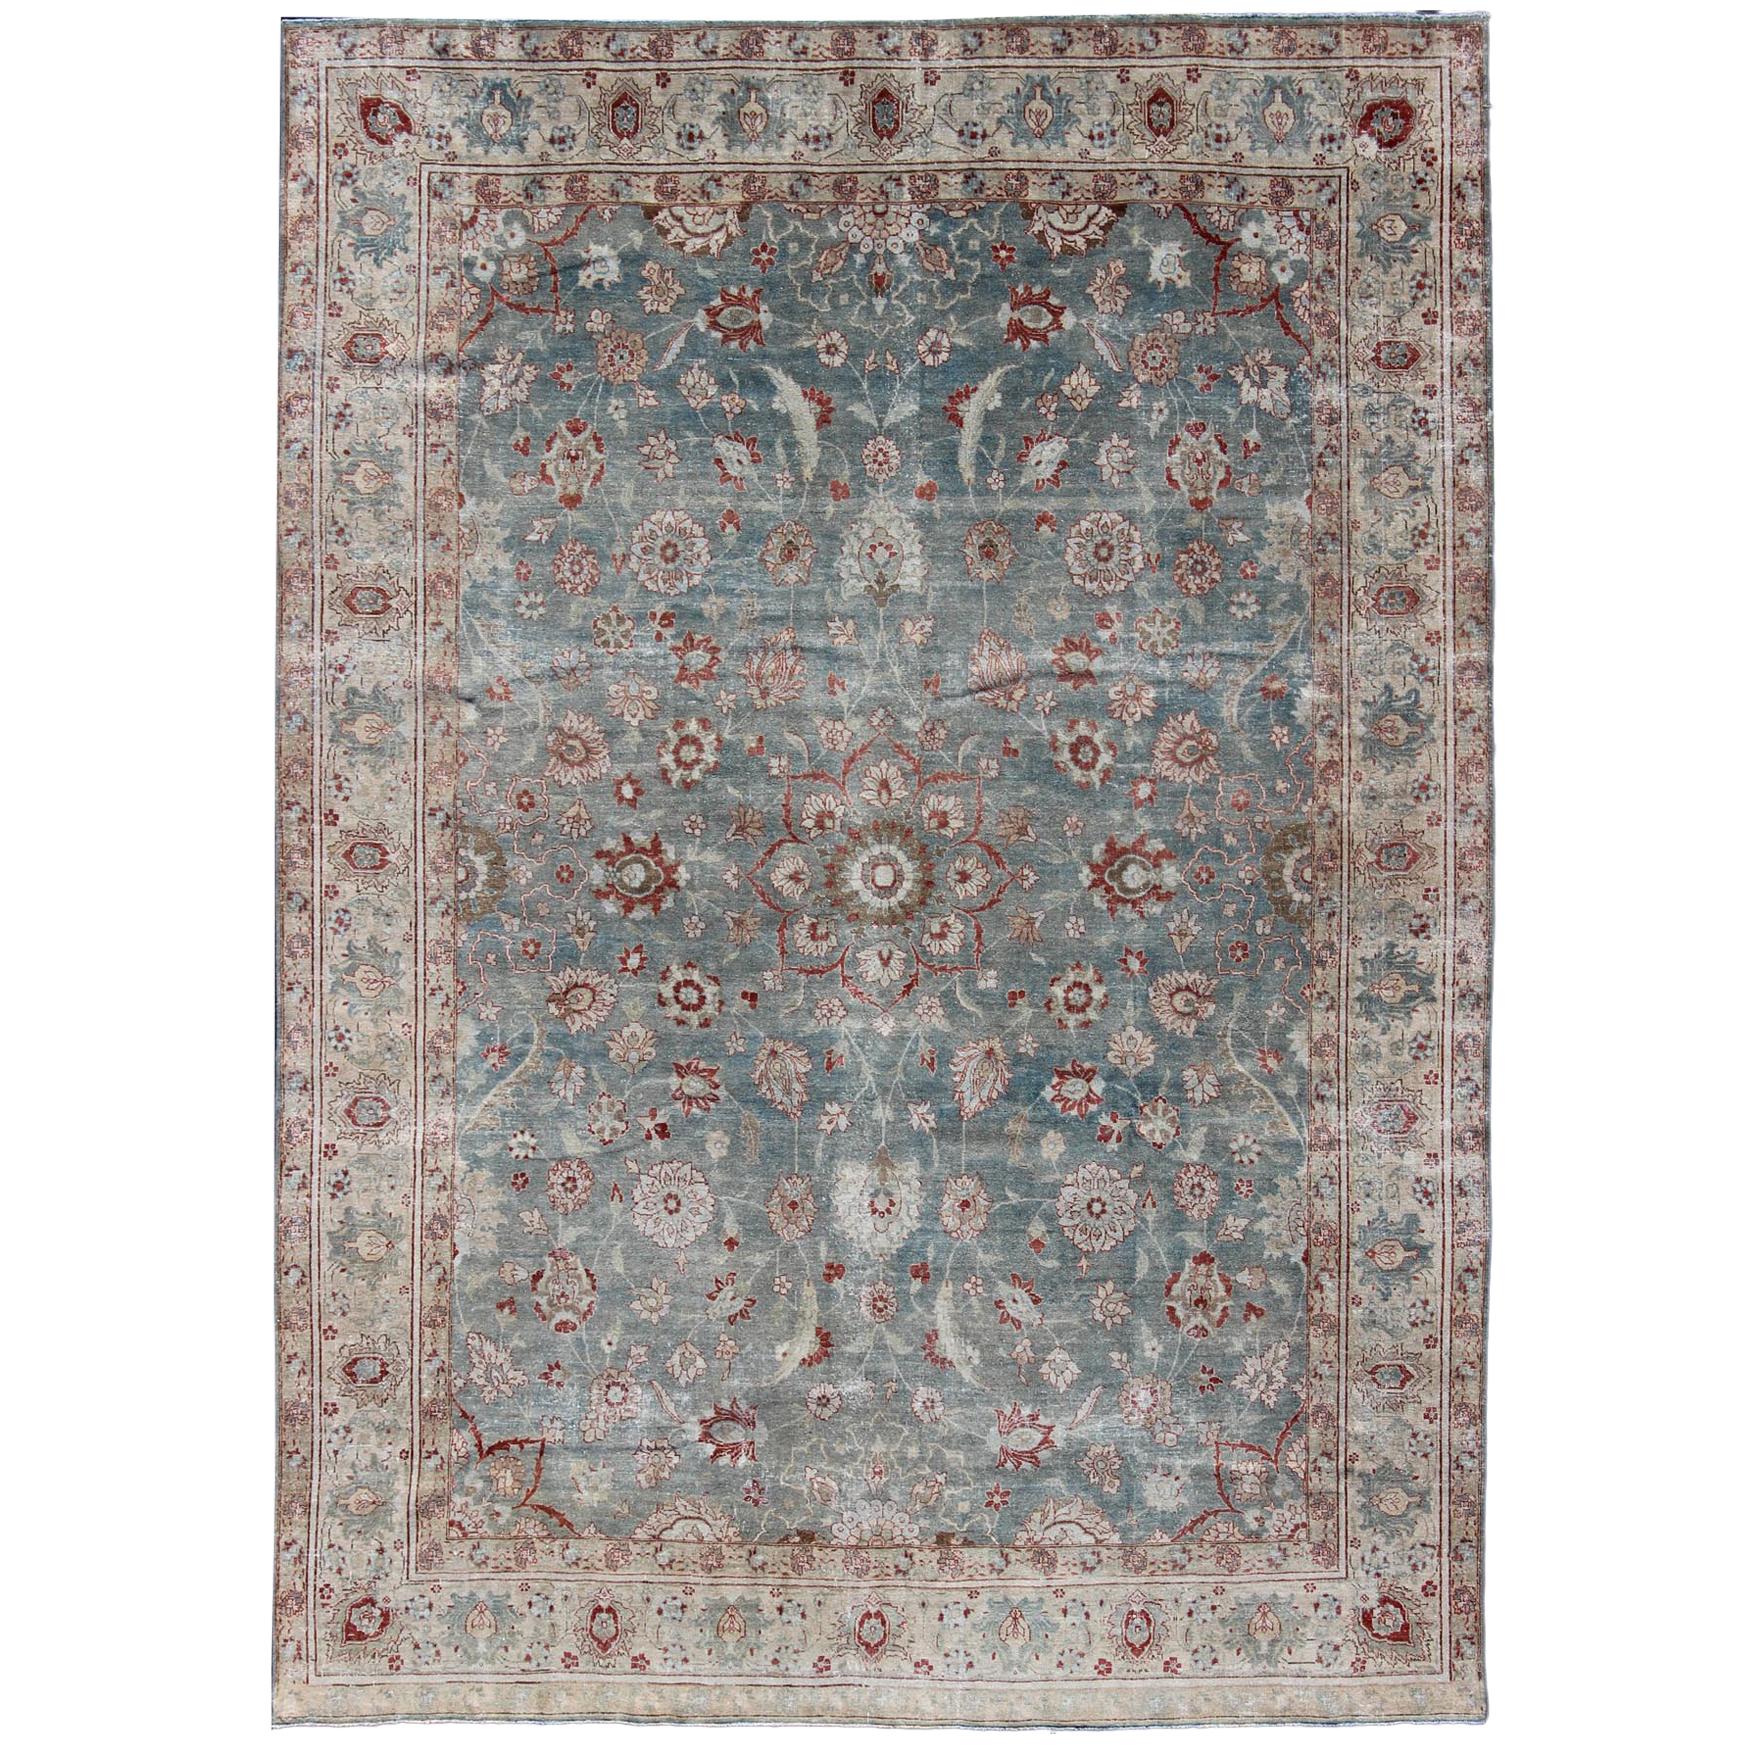 Antique Persian Tabriz Rug with Floral Medallion Design in Red and Blue